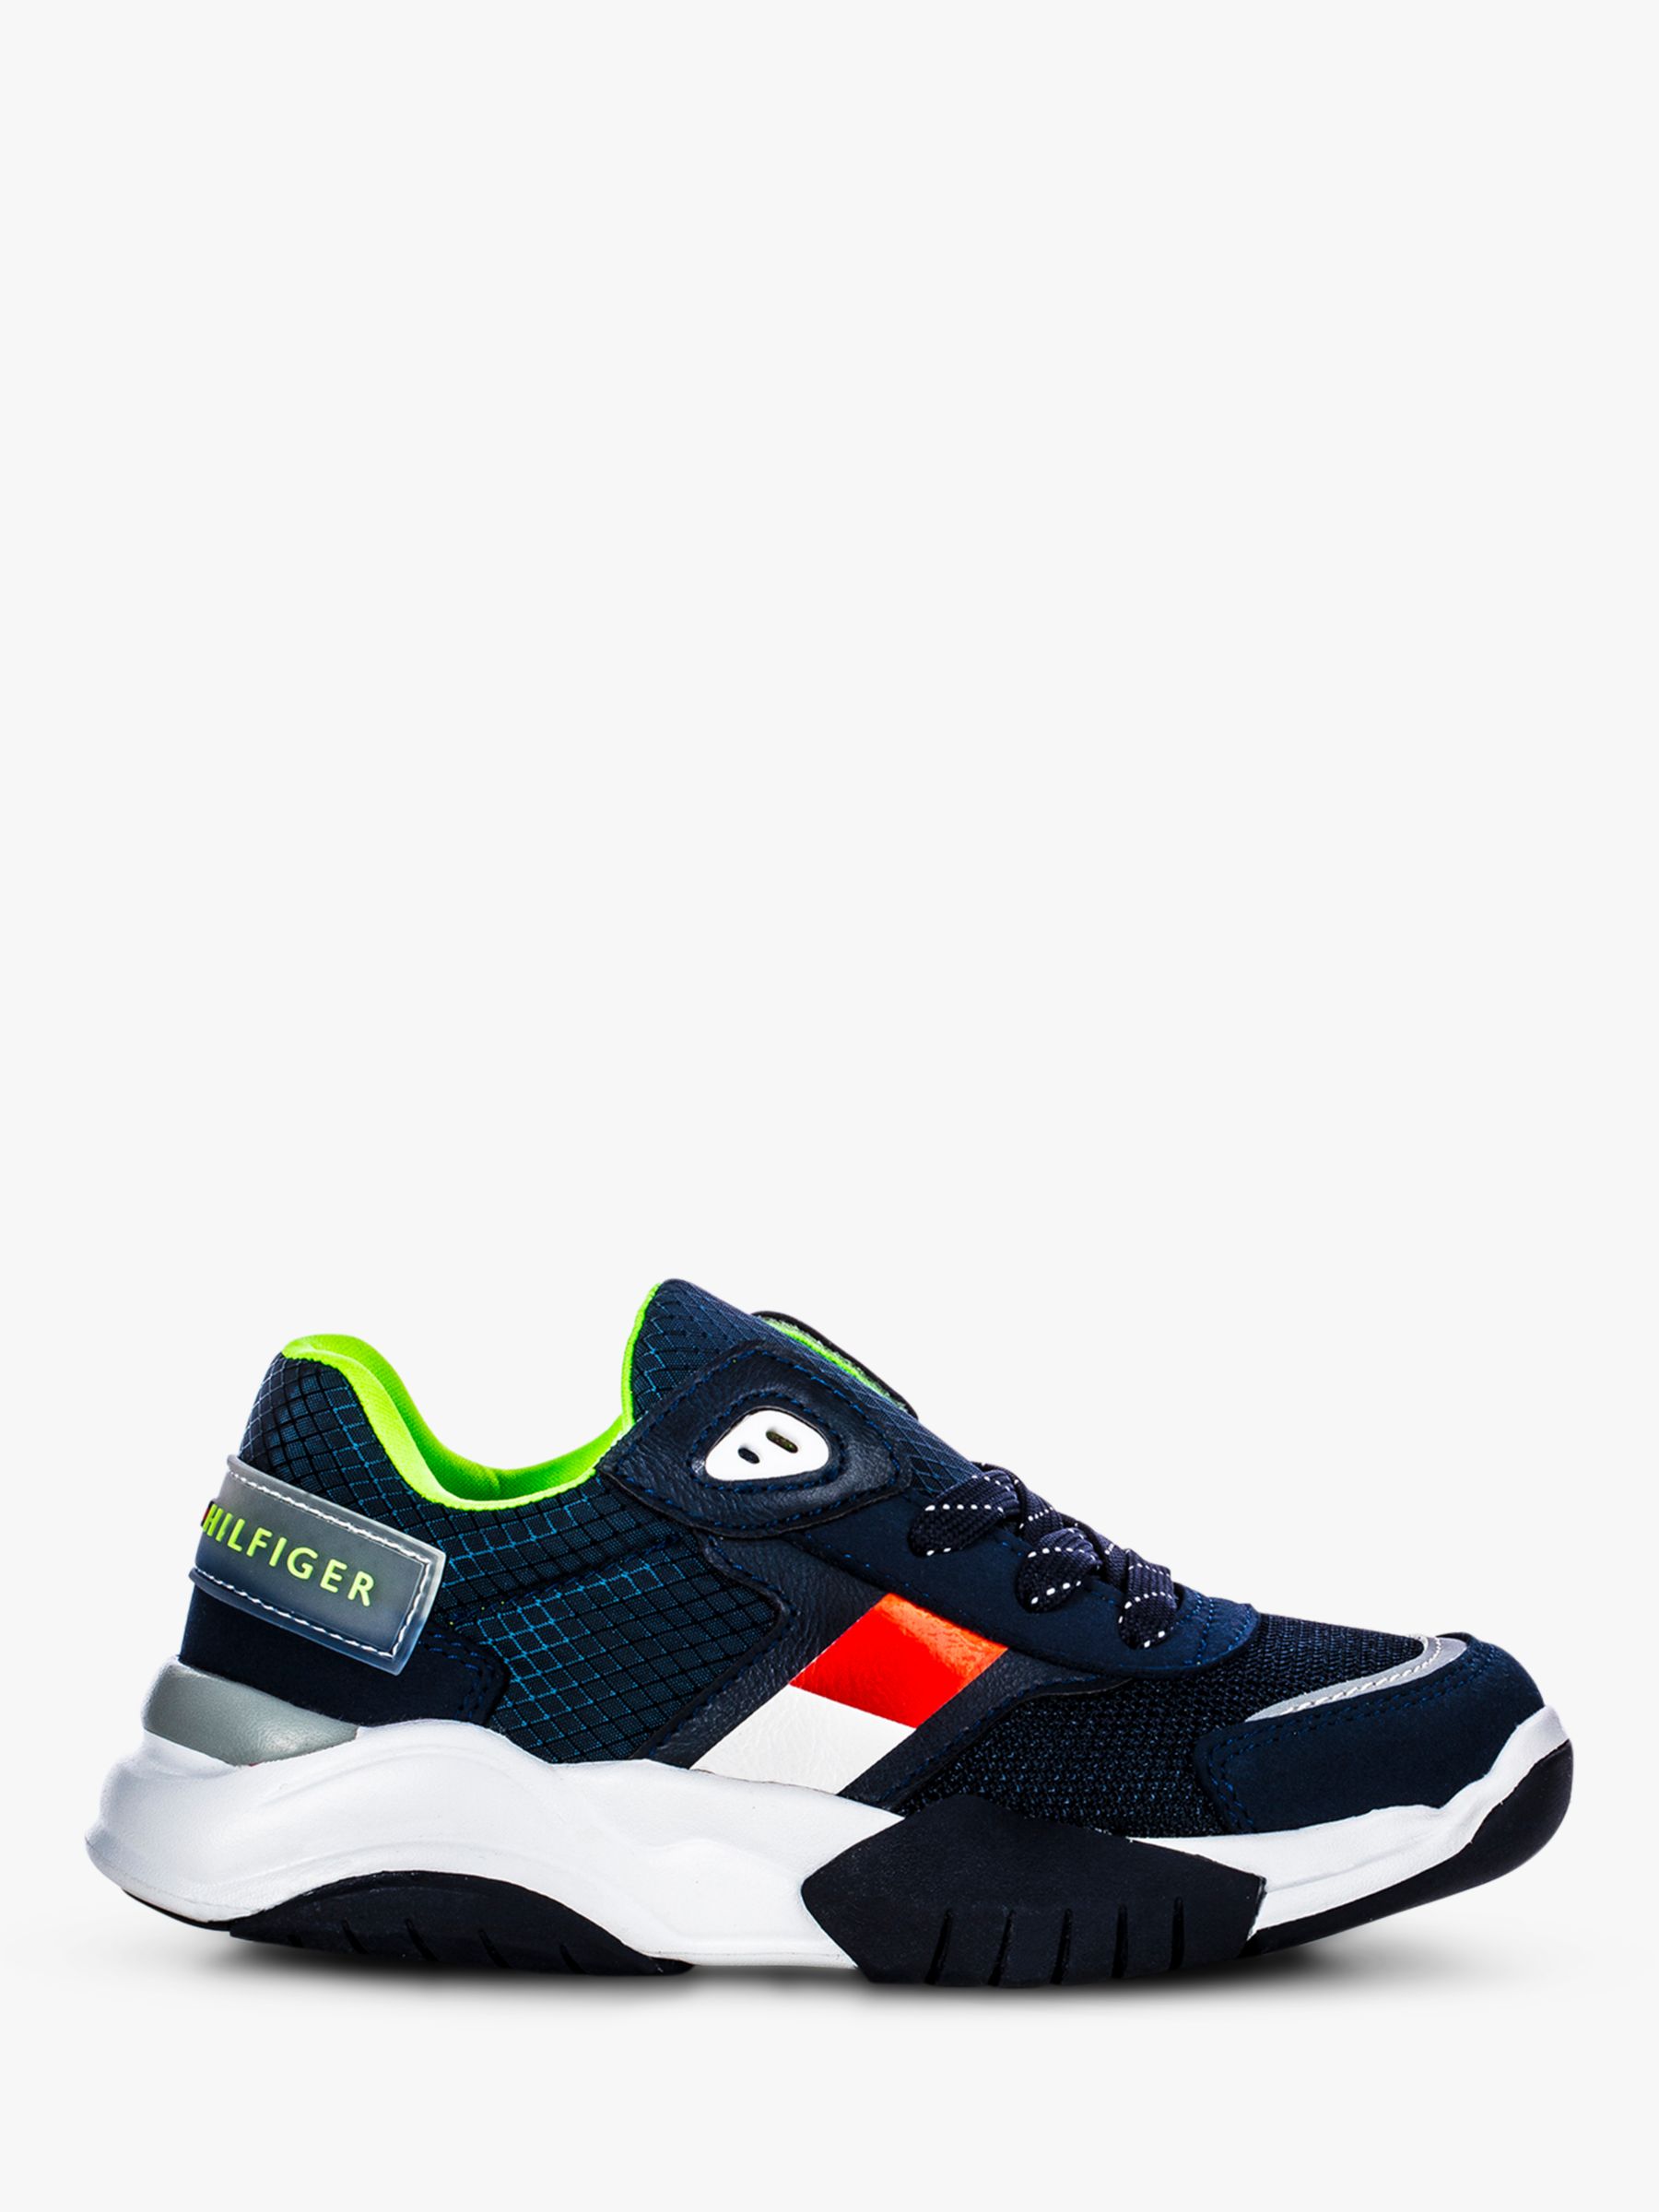 navy tommy hilfiger trainers